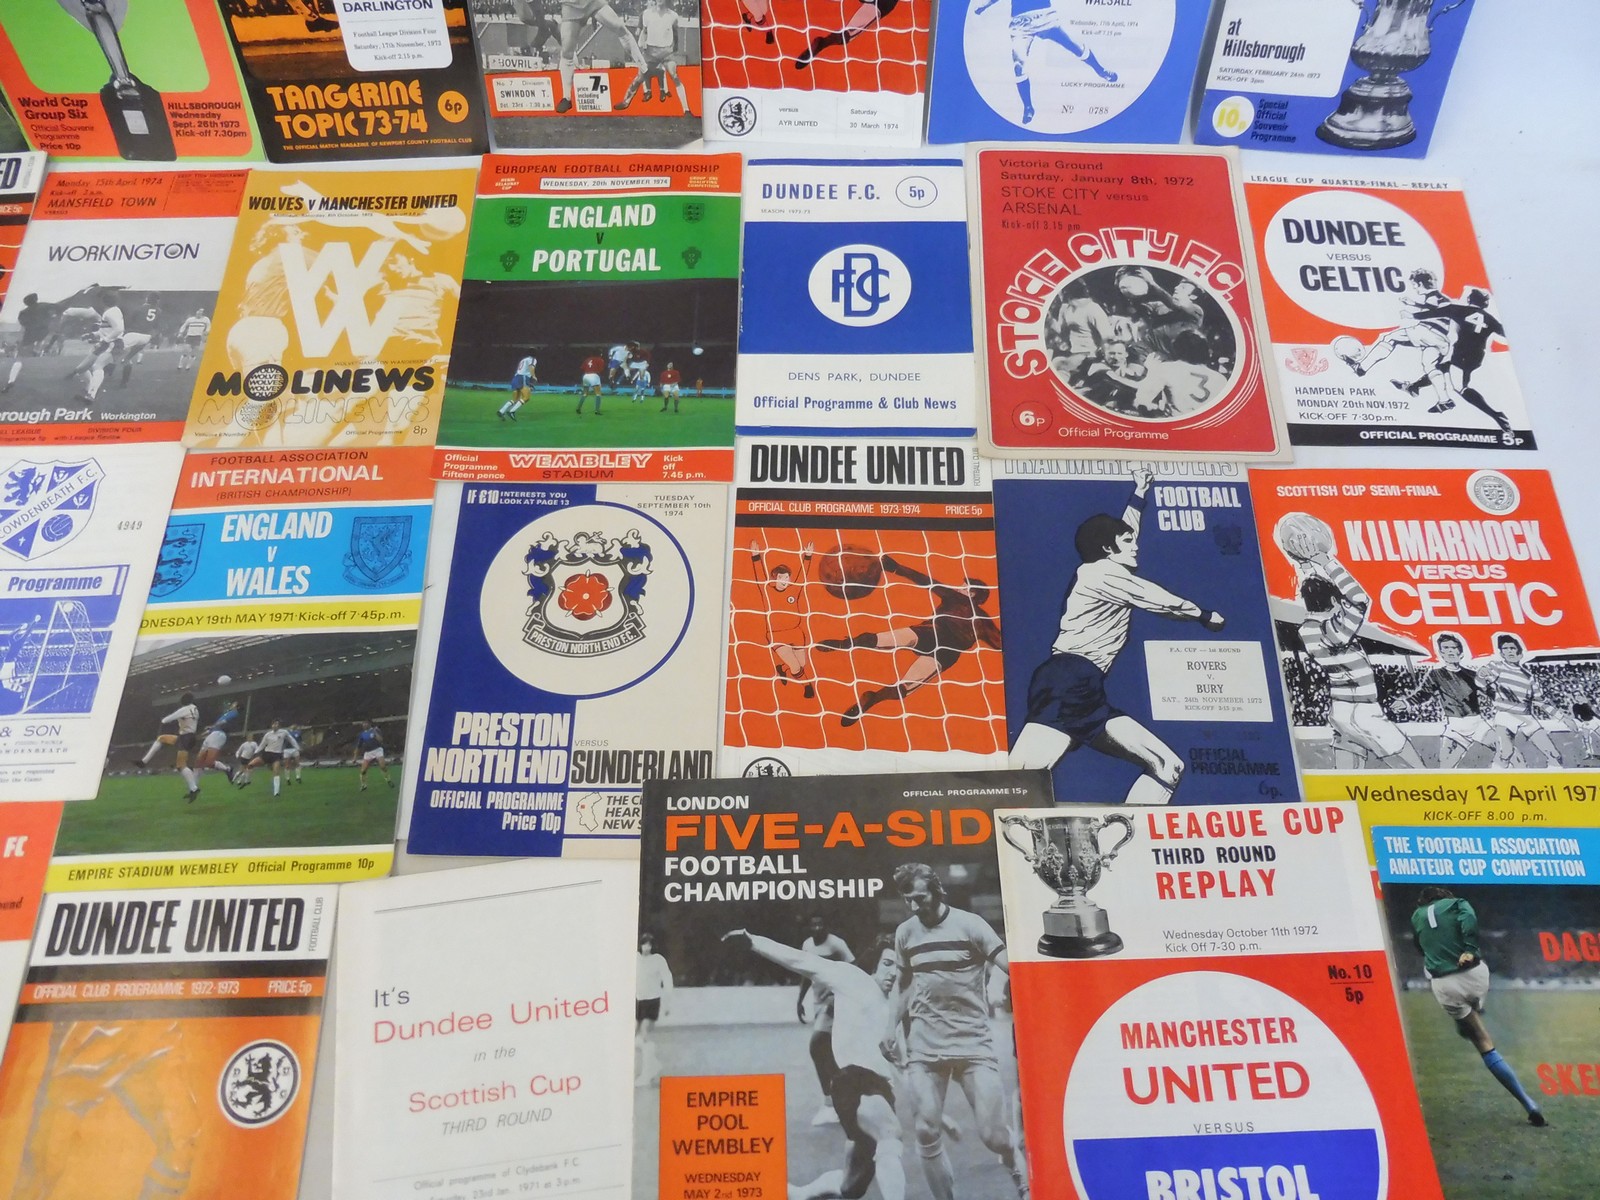 A large box of mixed sporting and other ephemera and programmes, some 1950s football: Swindon - Image 5 of 19